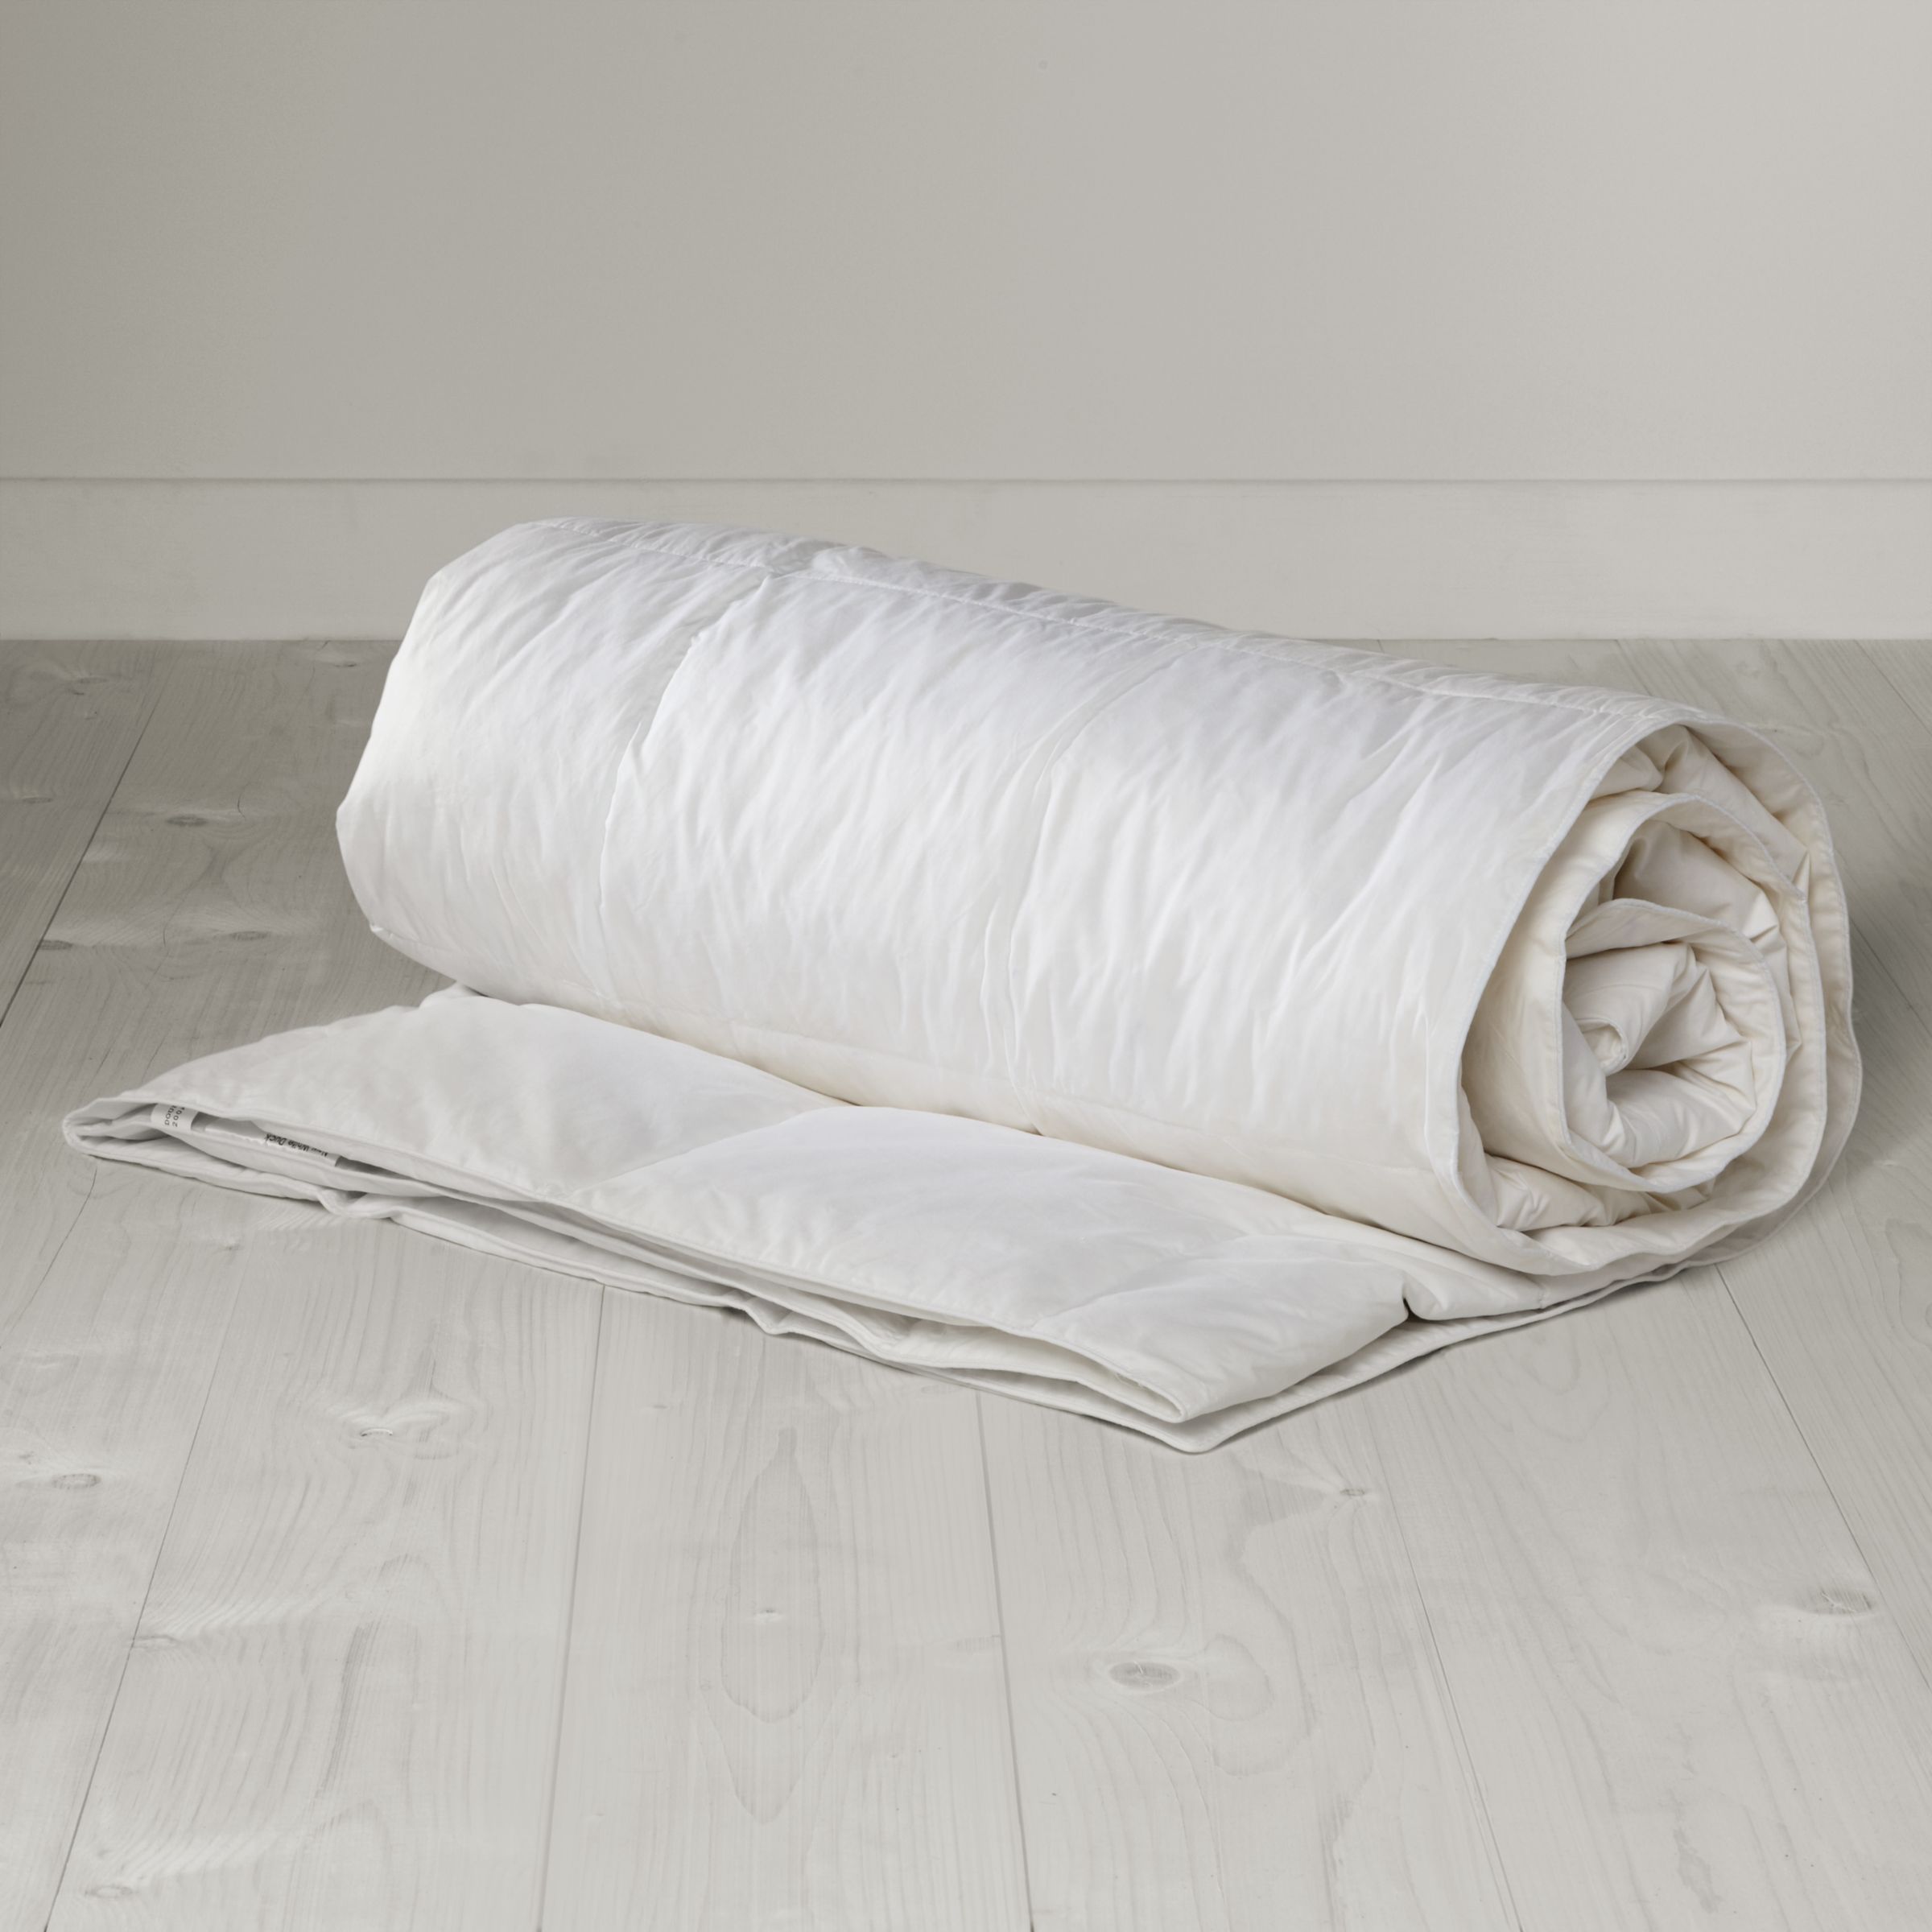 Duck Feather and Down Duvets, 4.5 Tog